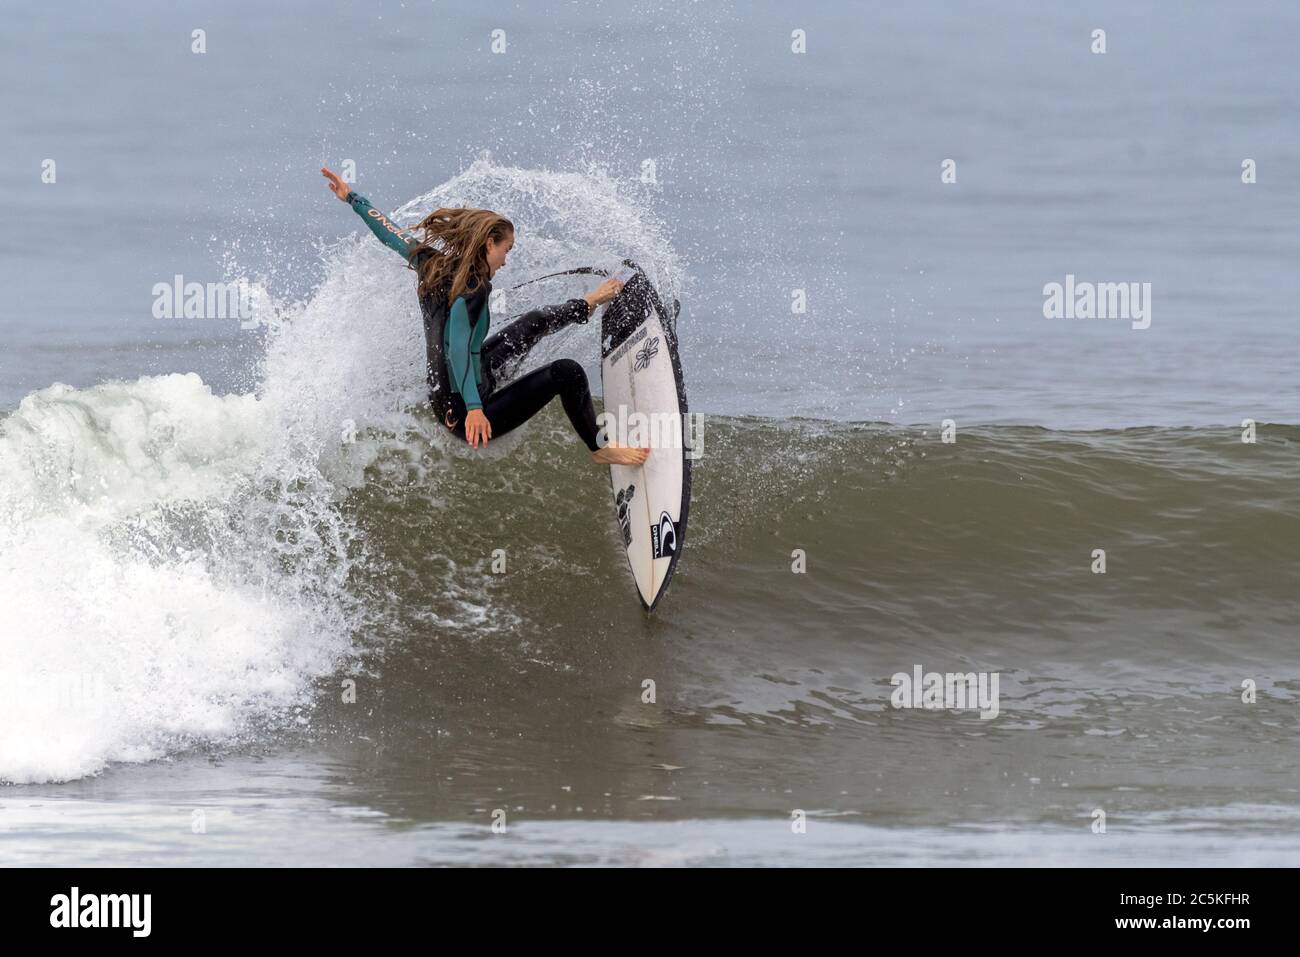 Young female teen surfer aggressively turns hard off the lip of a breaking wave and throws up spray at Surfer's Knoll in Ventura, California, USA on J Stock Photo